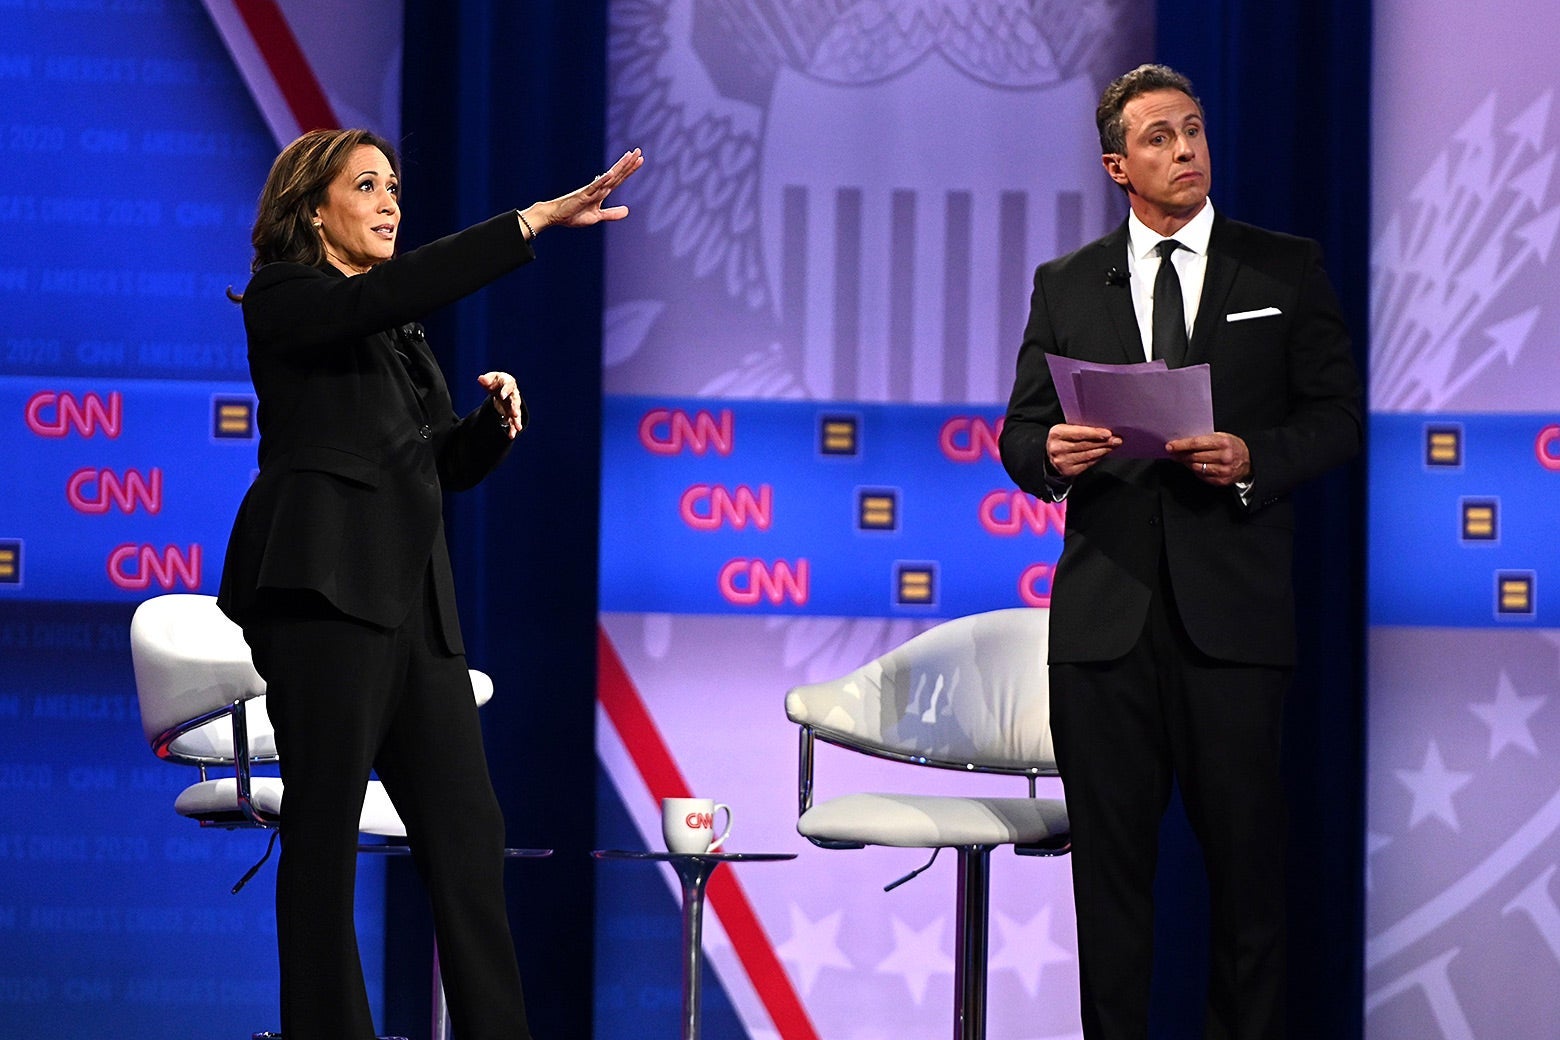 Kamala Harris points out toward the audience as Chris Cuomo stands beside her holding documents.